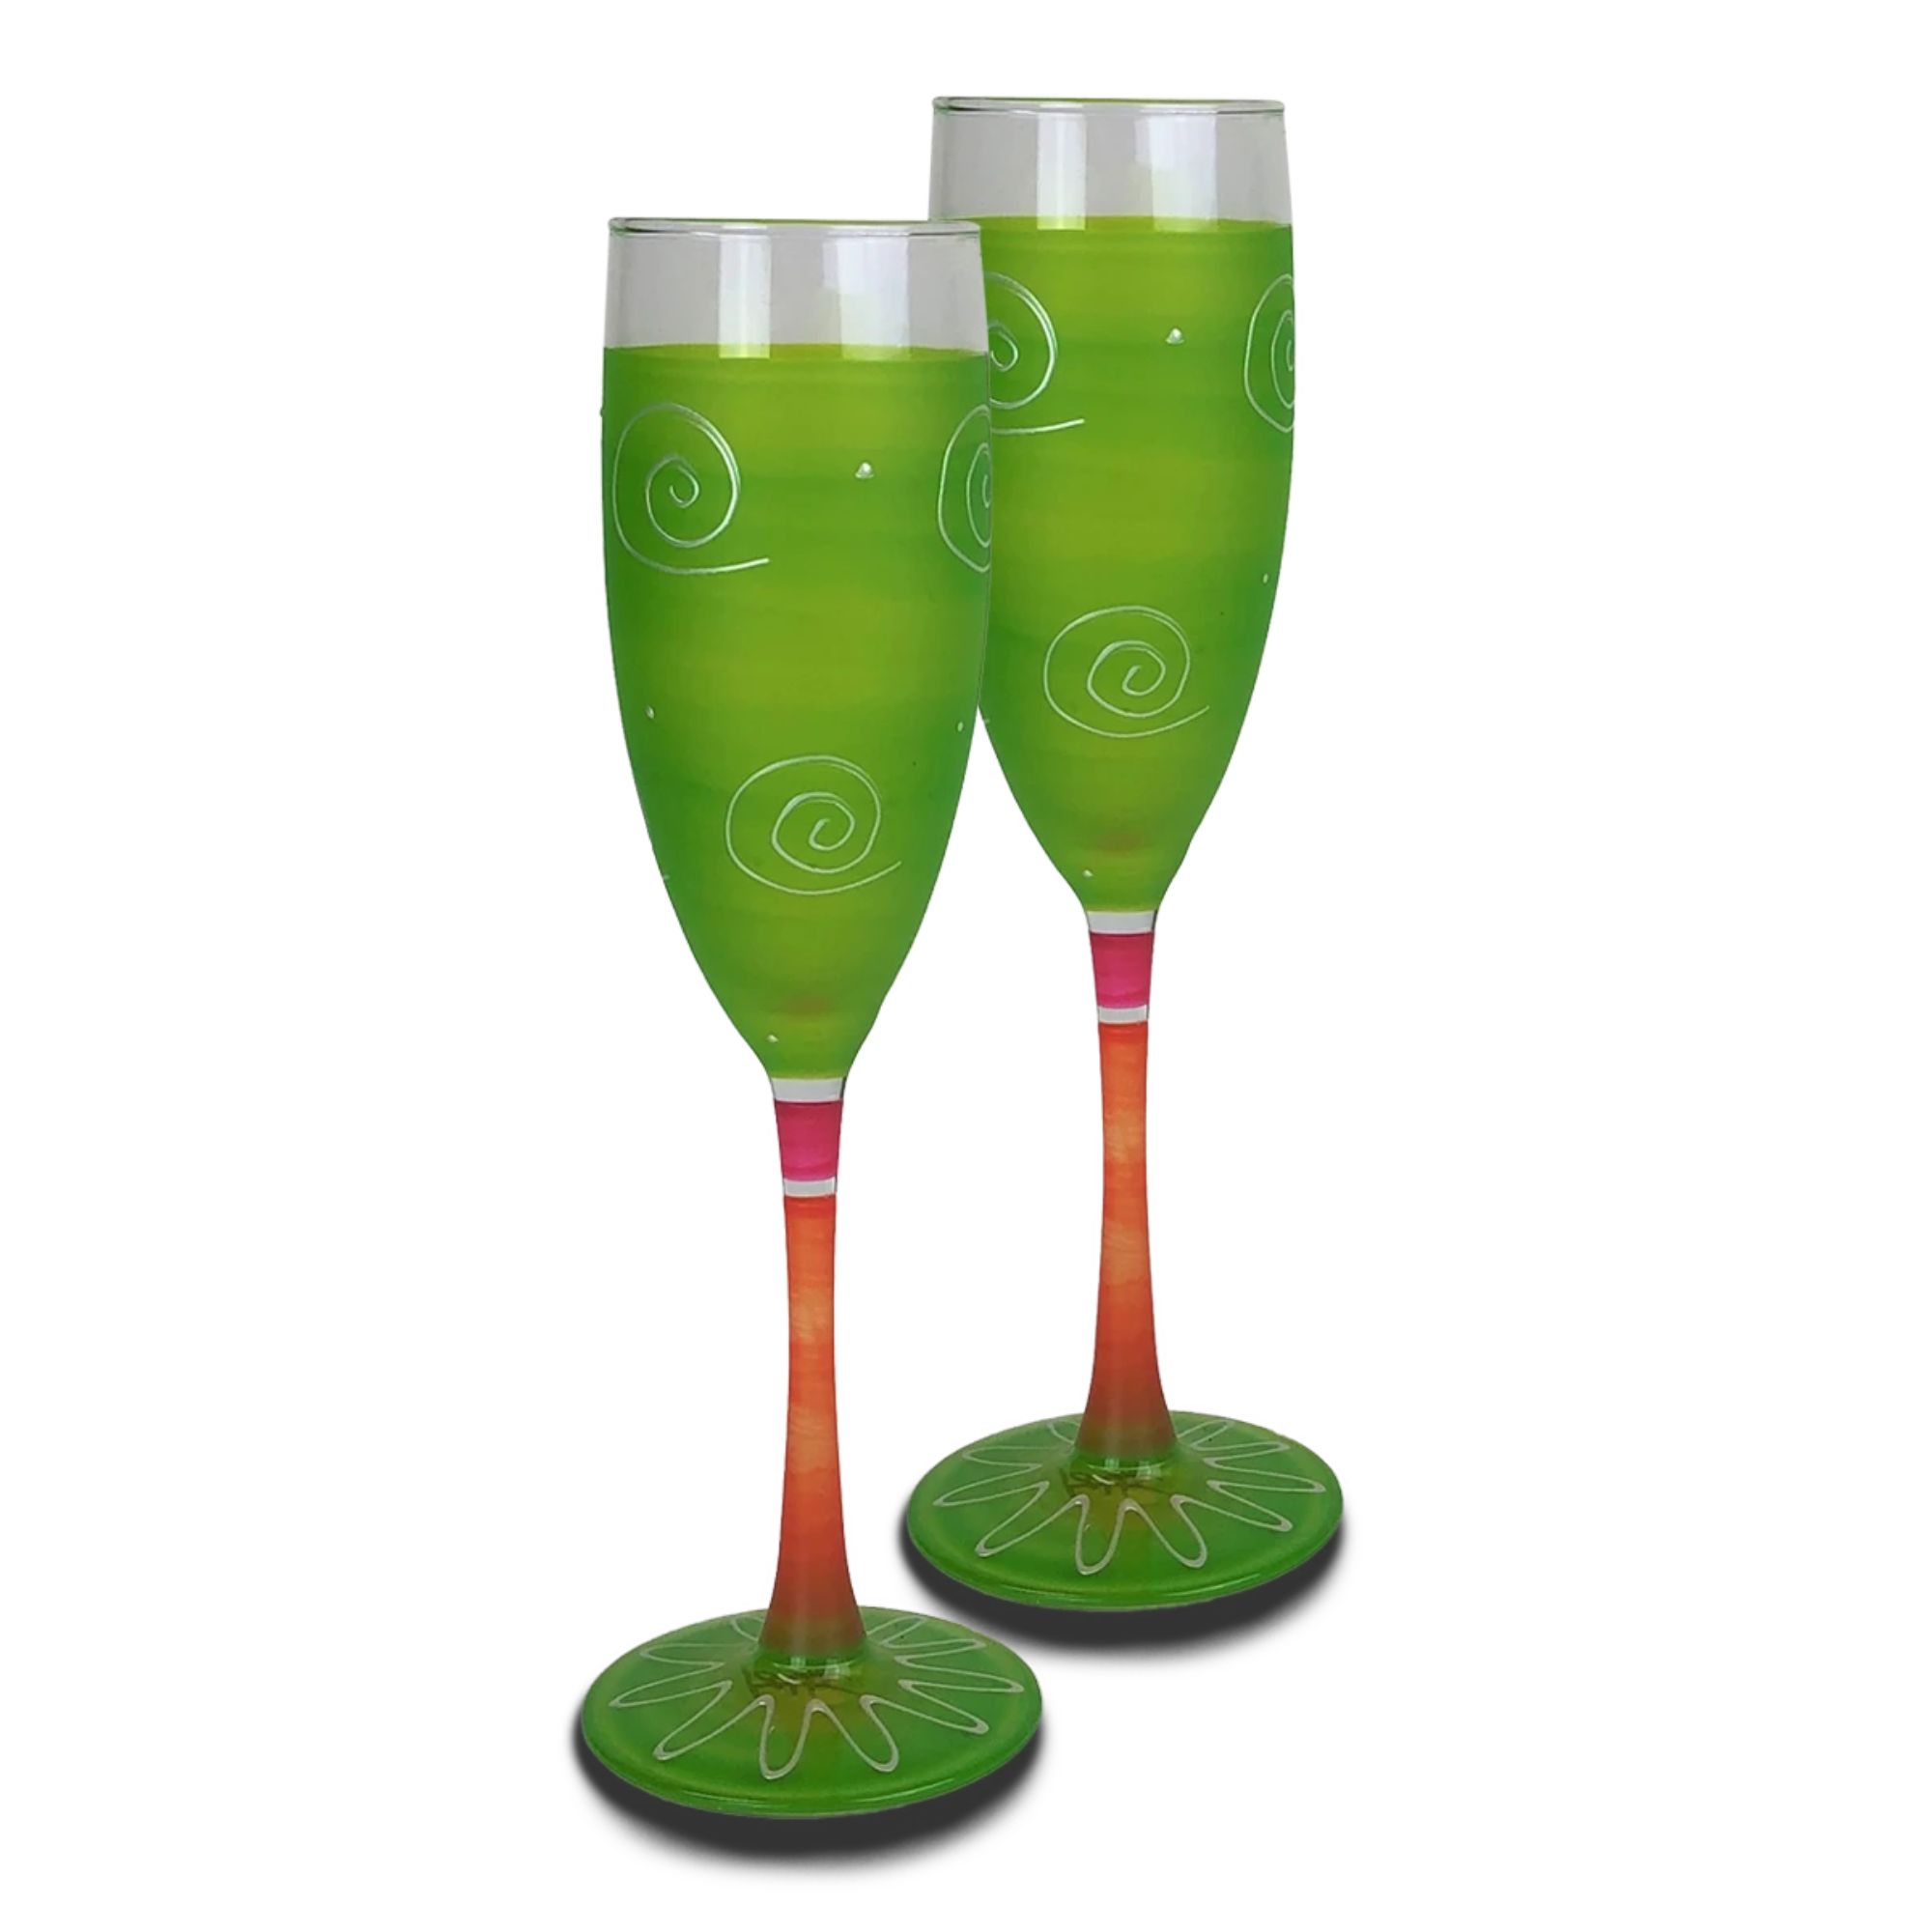 Golden Hill Studio Set of 2 Green and Orange Contemporary Hand Painted Wine Glasses 5.75 oz.